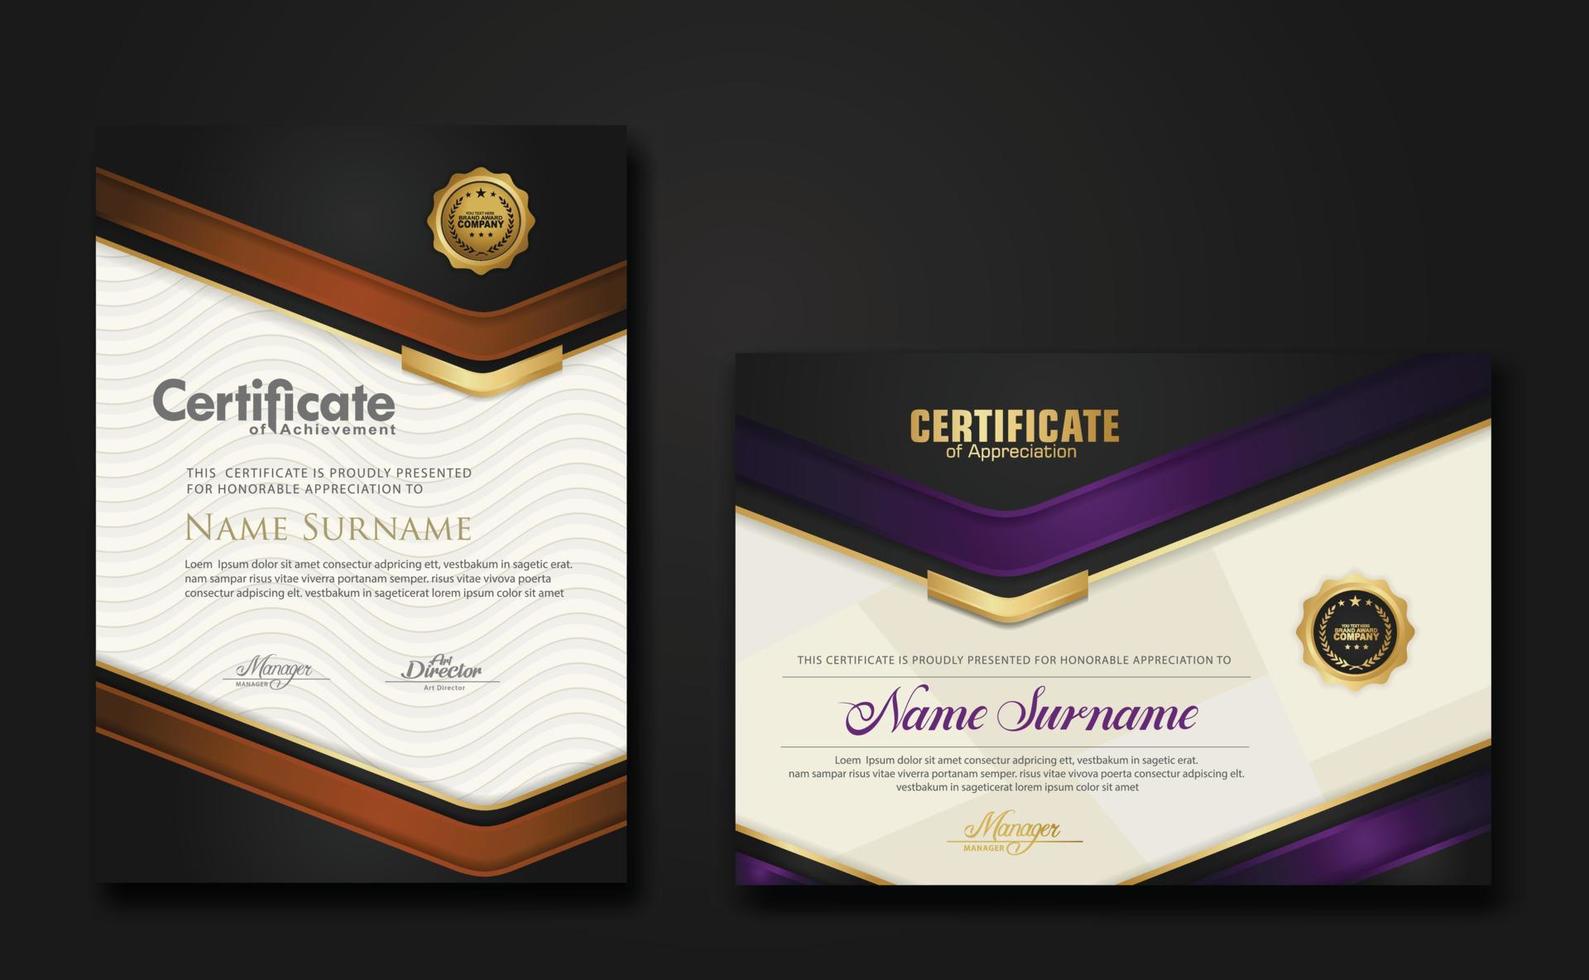 New design two set luxury certificate template with shadow effect on overlap layers and cream color on pattern background vector